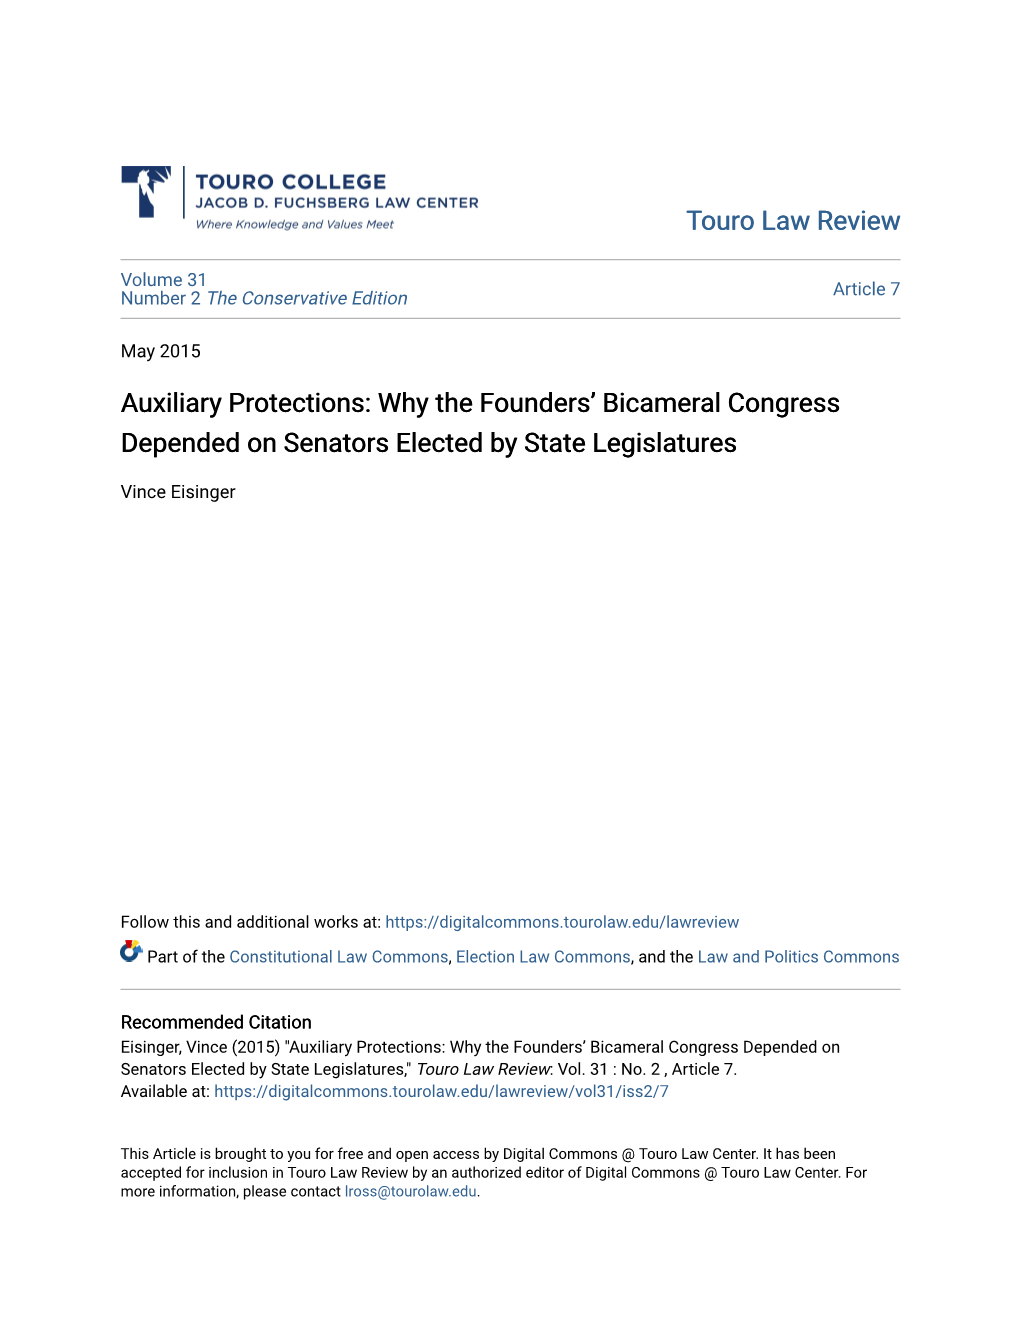 Why the Founders' Bicameral Congress Depended on Senators